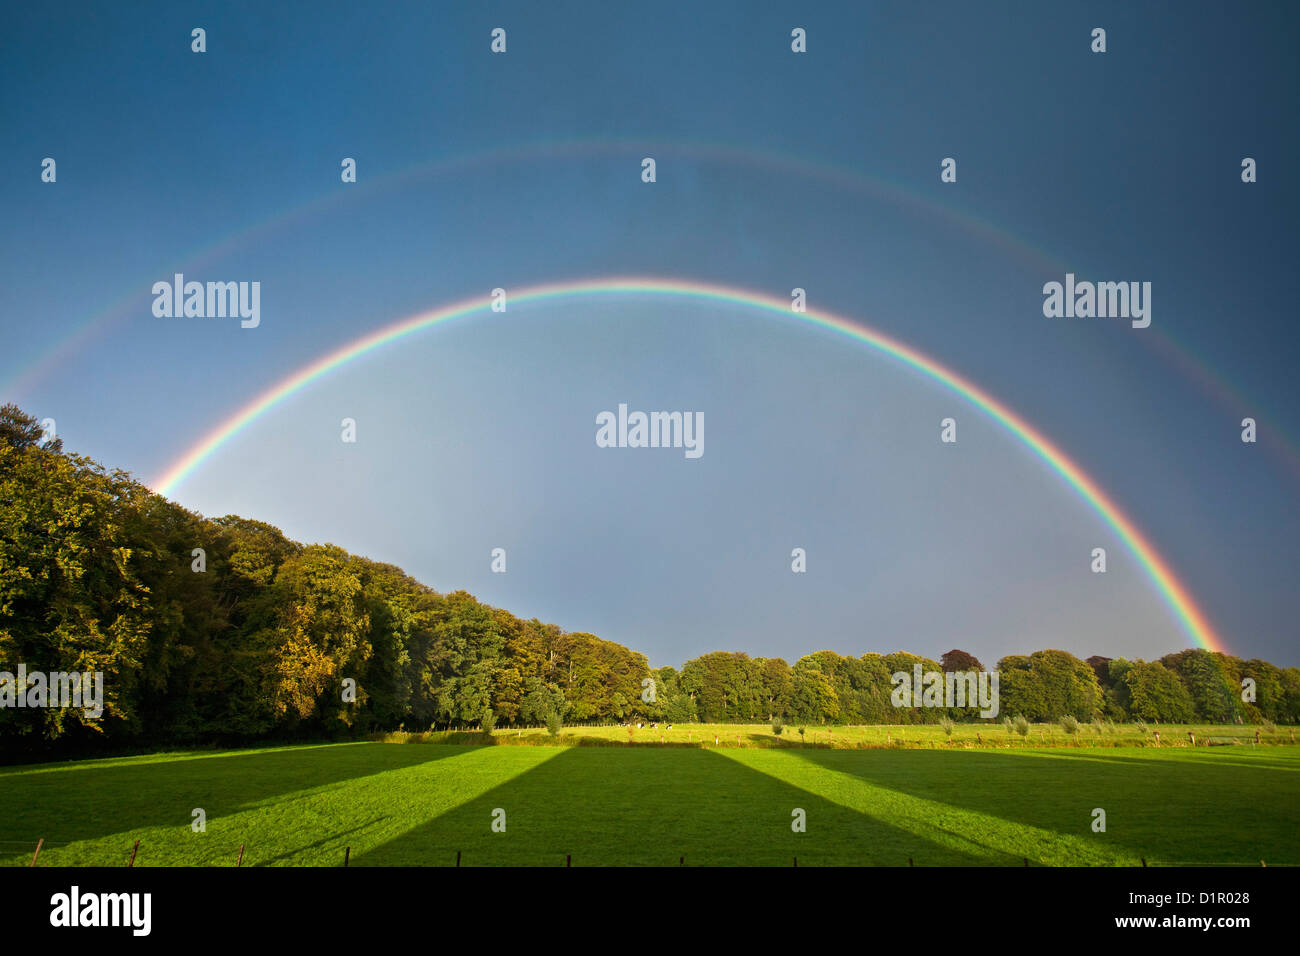 The Netherlands, 's-Graveland. Rural estate called Hilverbeek. Double rainbow. Stock Photo